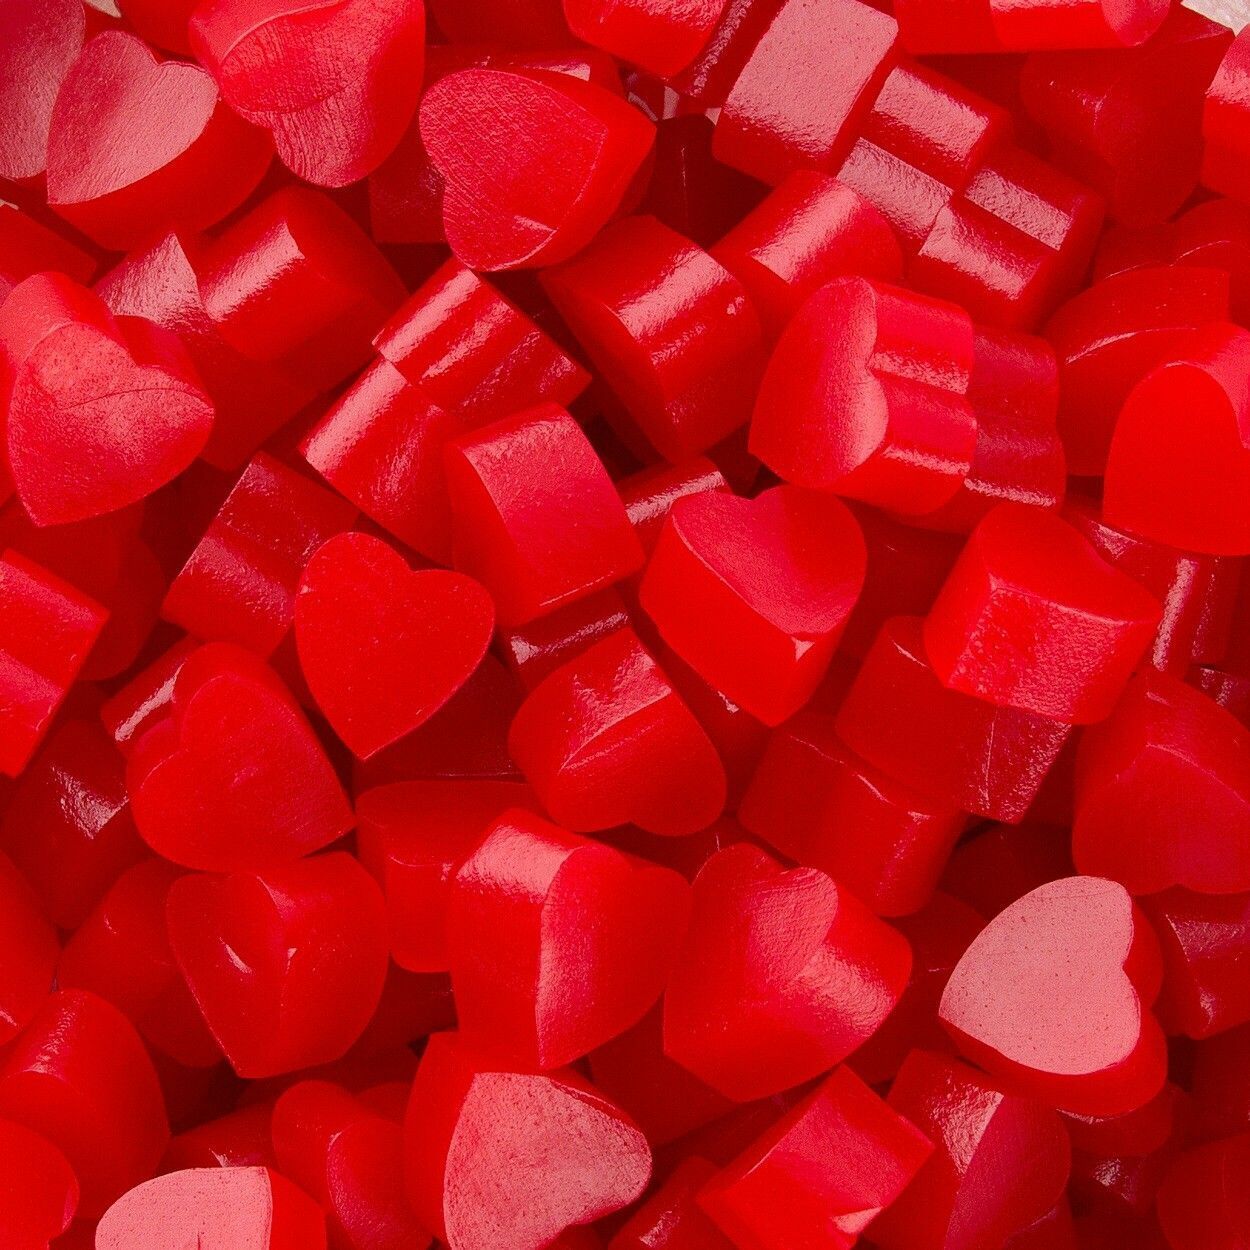 A pile of red heart shaped sweets - Candy, lovecore